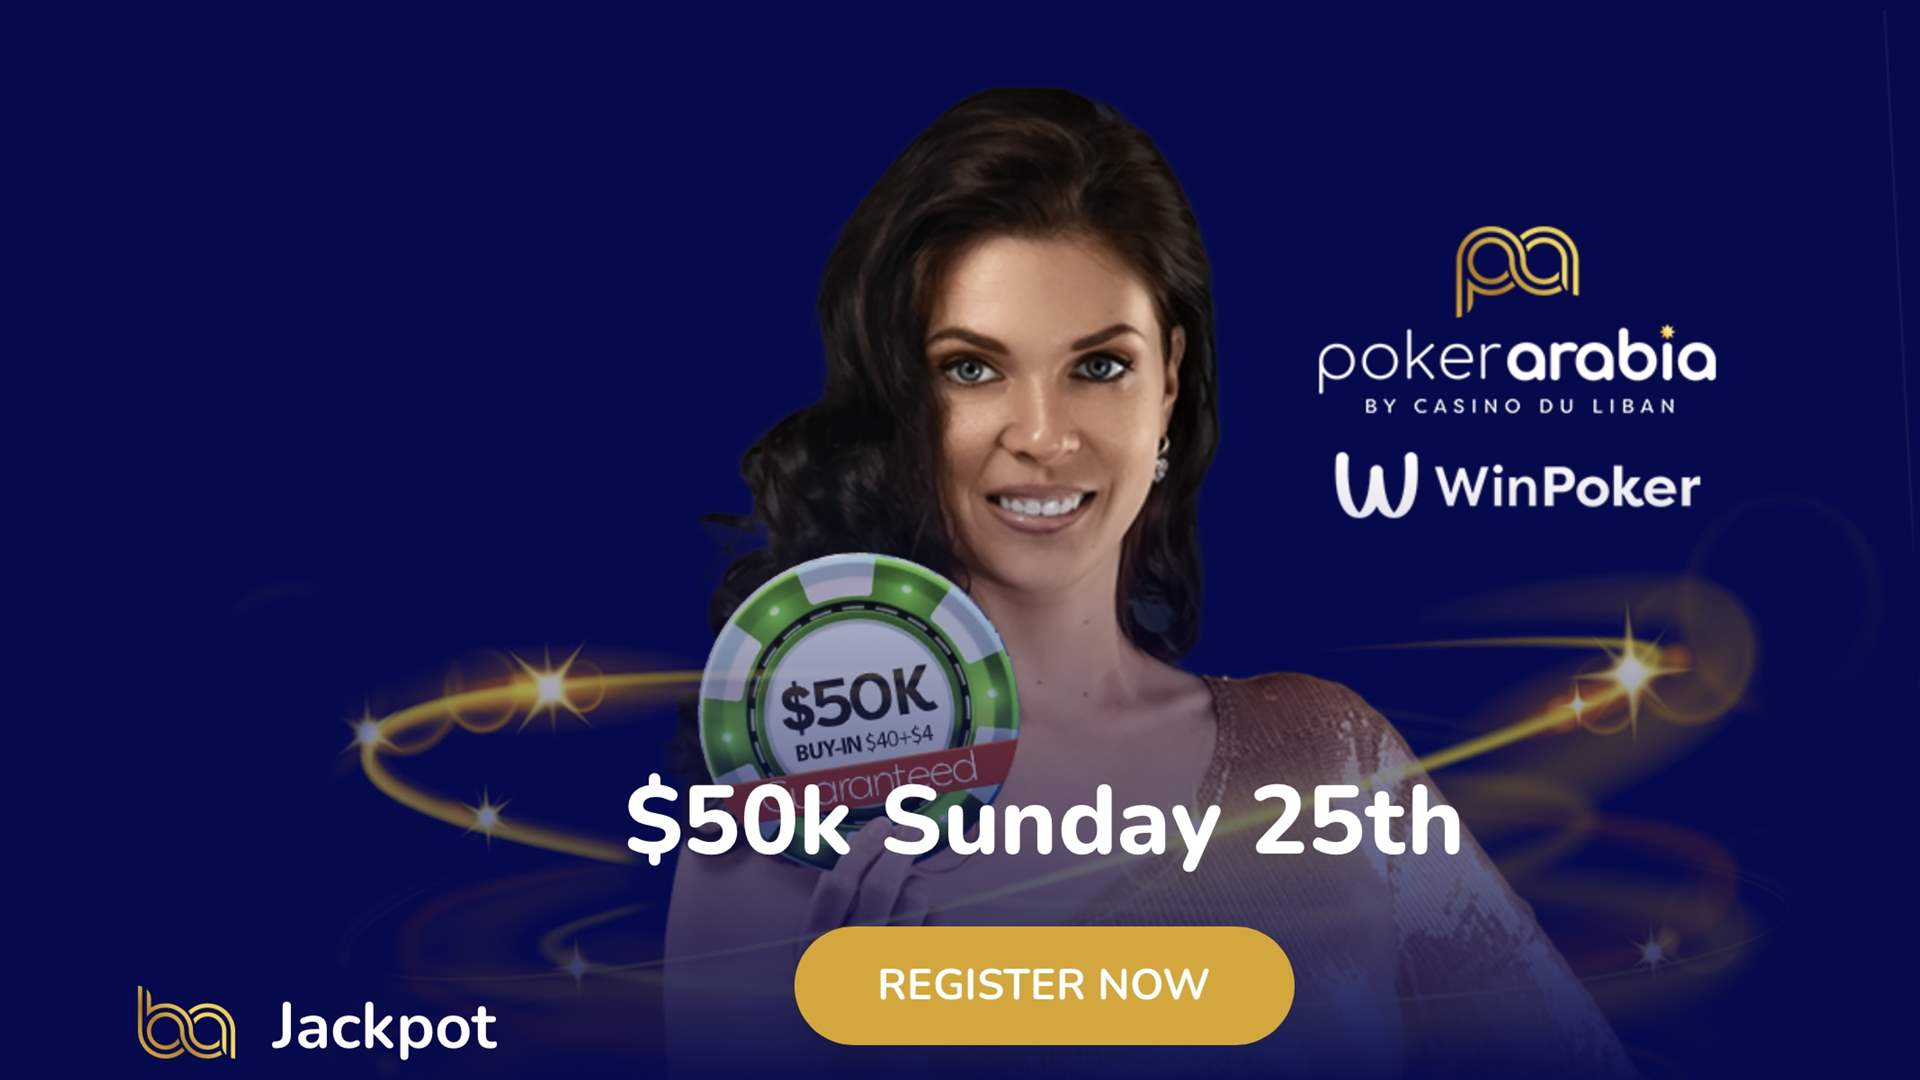 Join BetArabia $40+$4 $50,000 GUARANTEED. WinPoker welcoming tournament on Sunday the 25th at 8 PM www.BetArabia.com